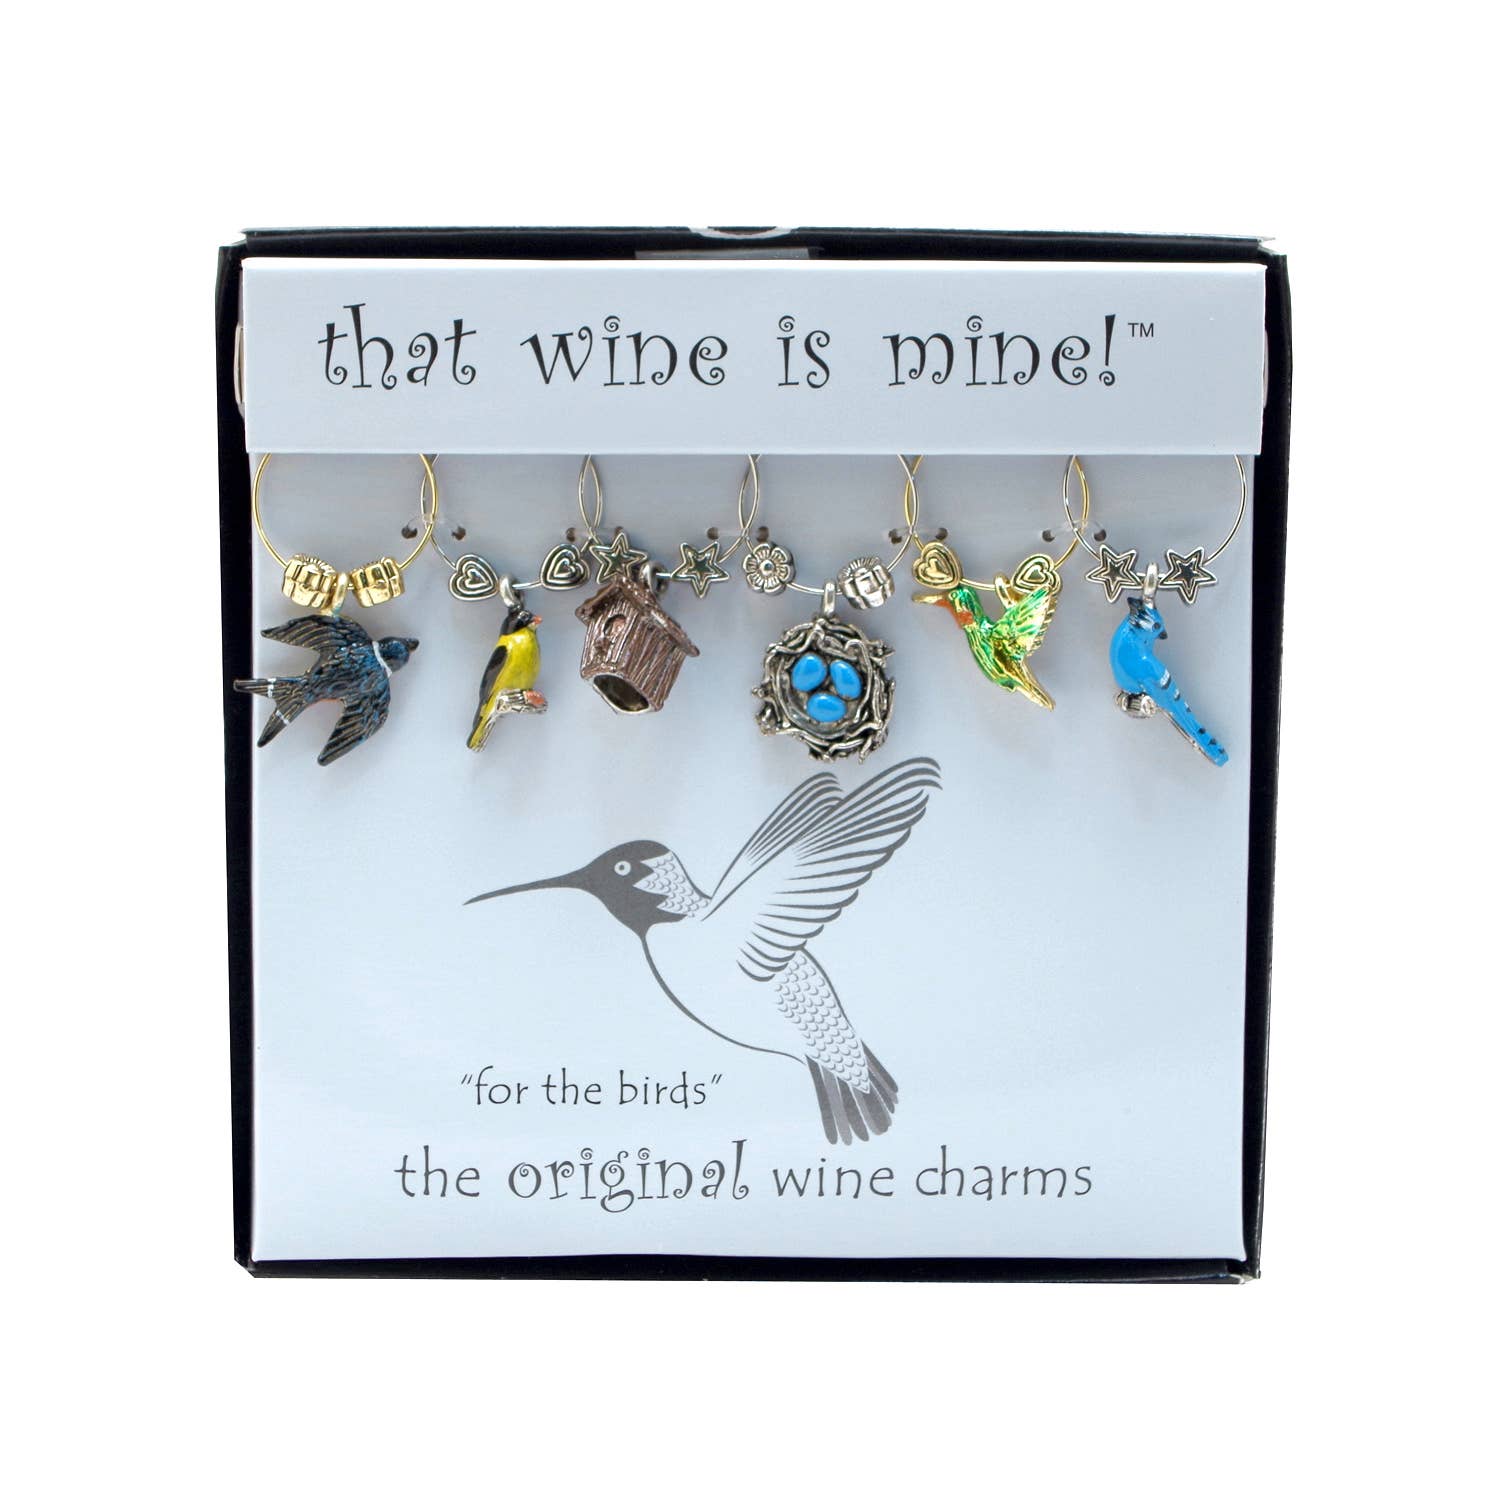 Bird themed "For The Birds" Painted Wine Charms